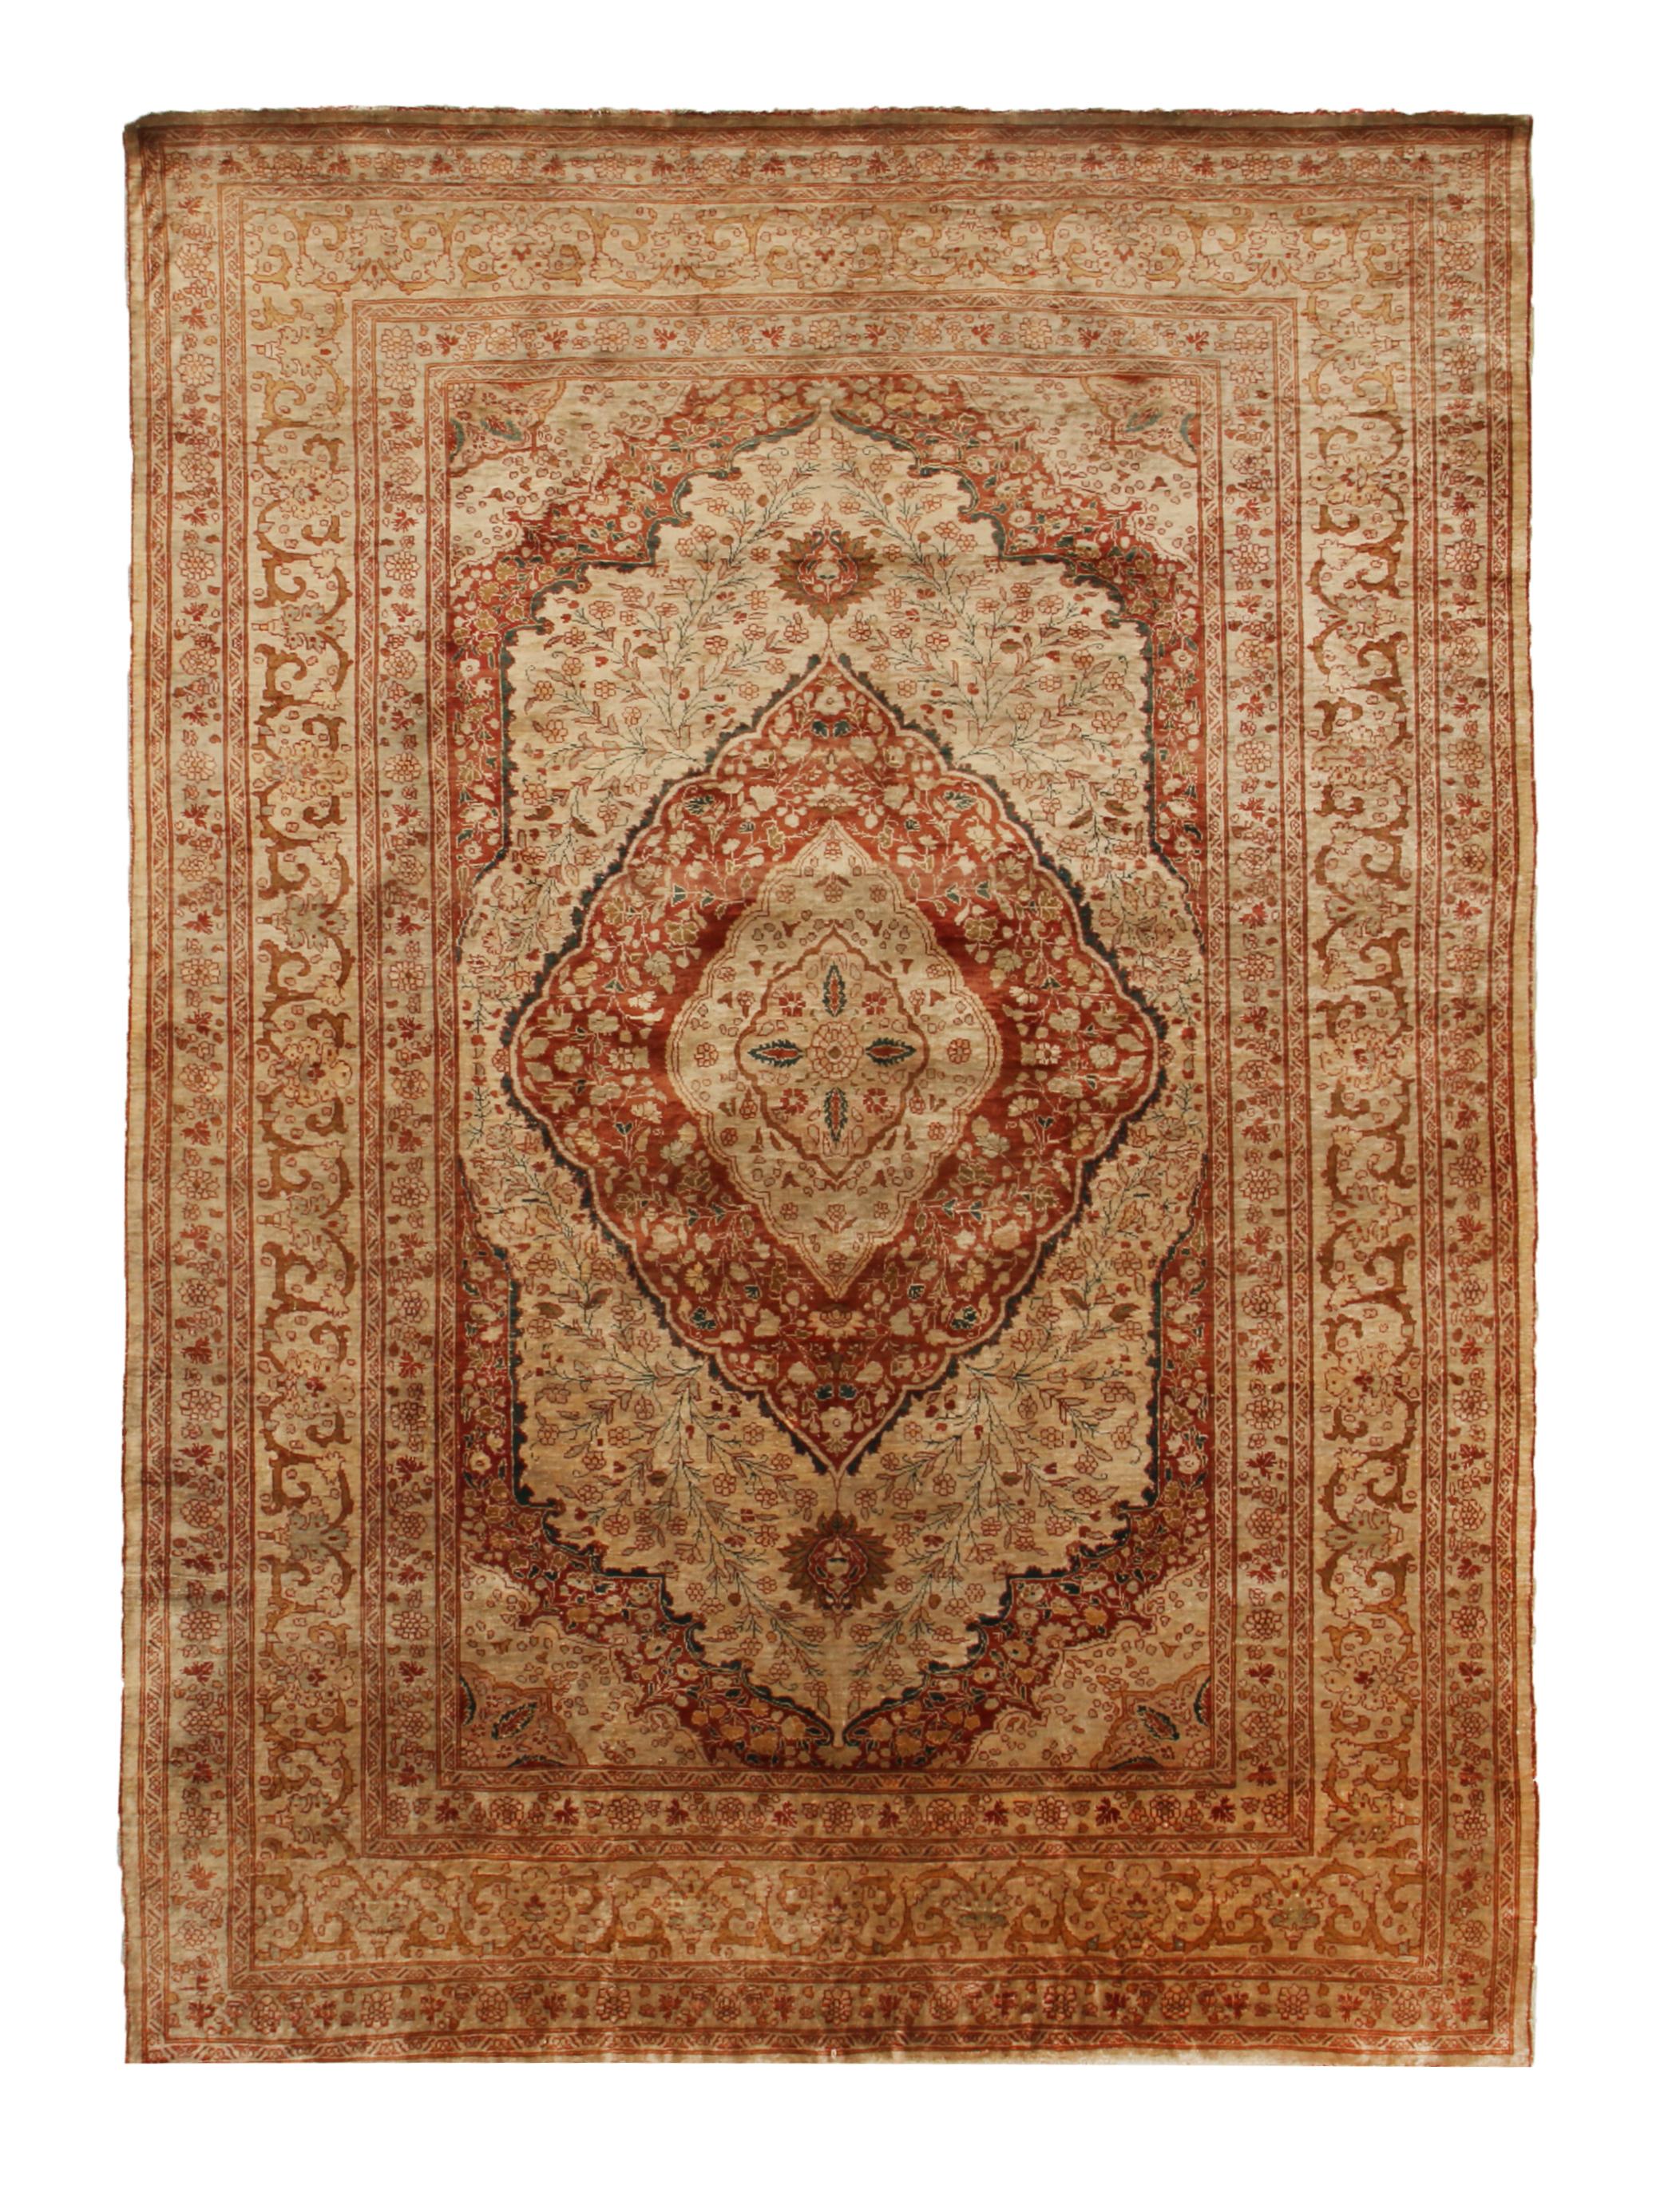 Hand knotted in a lightly distressed, luminous silk body originating from Persia in 1900, this antique Tabriz Persian rug enjoys an uncommon dimensionality in the pairing of these rare beige and pink colourways with an intricate field and border